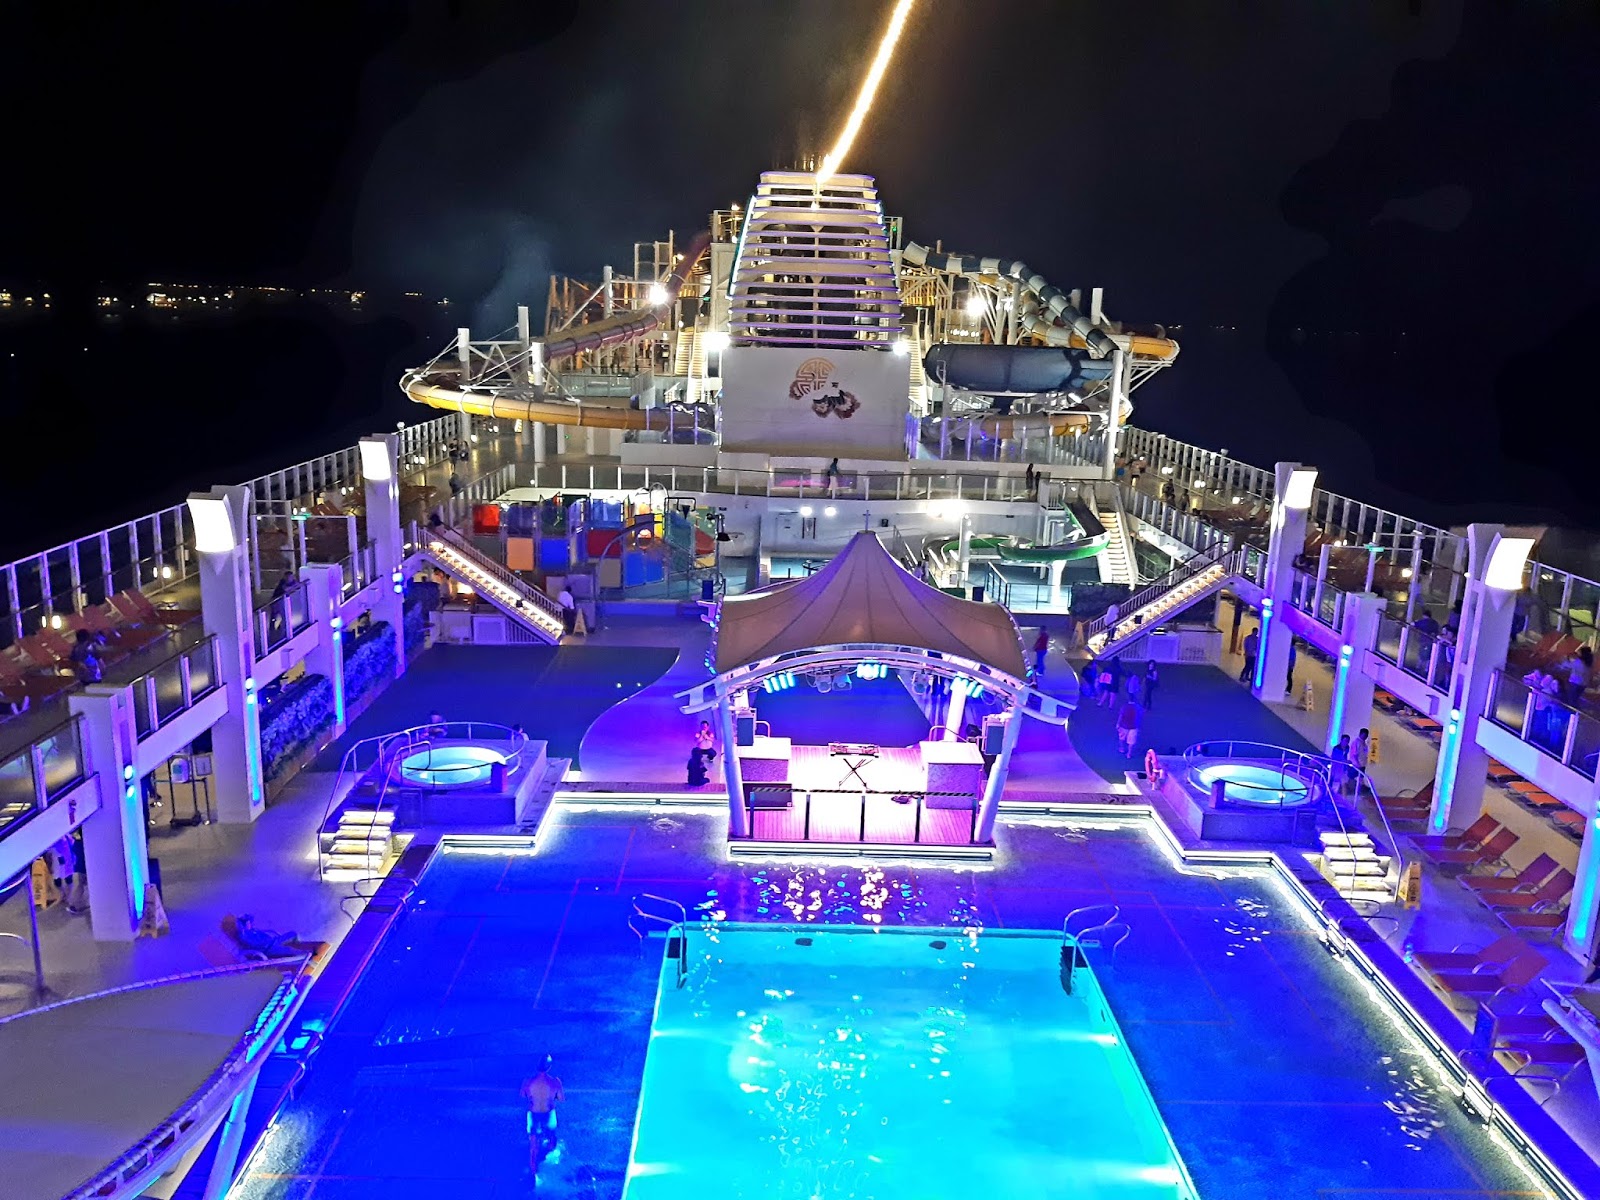 TheArcticStar's Tales: Vacation on a Cruise Ship - Genting Dream Cruise